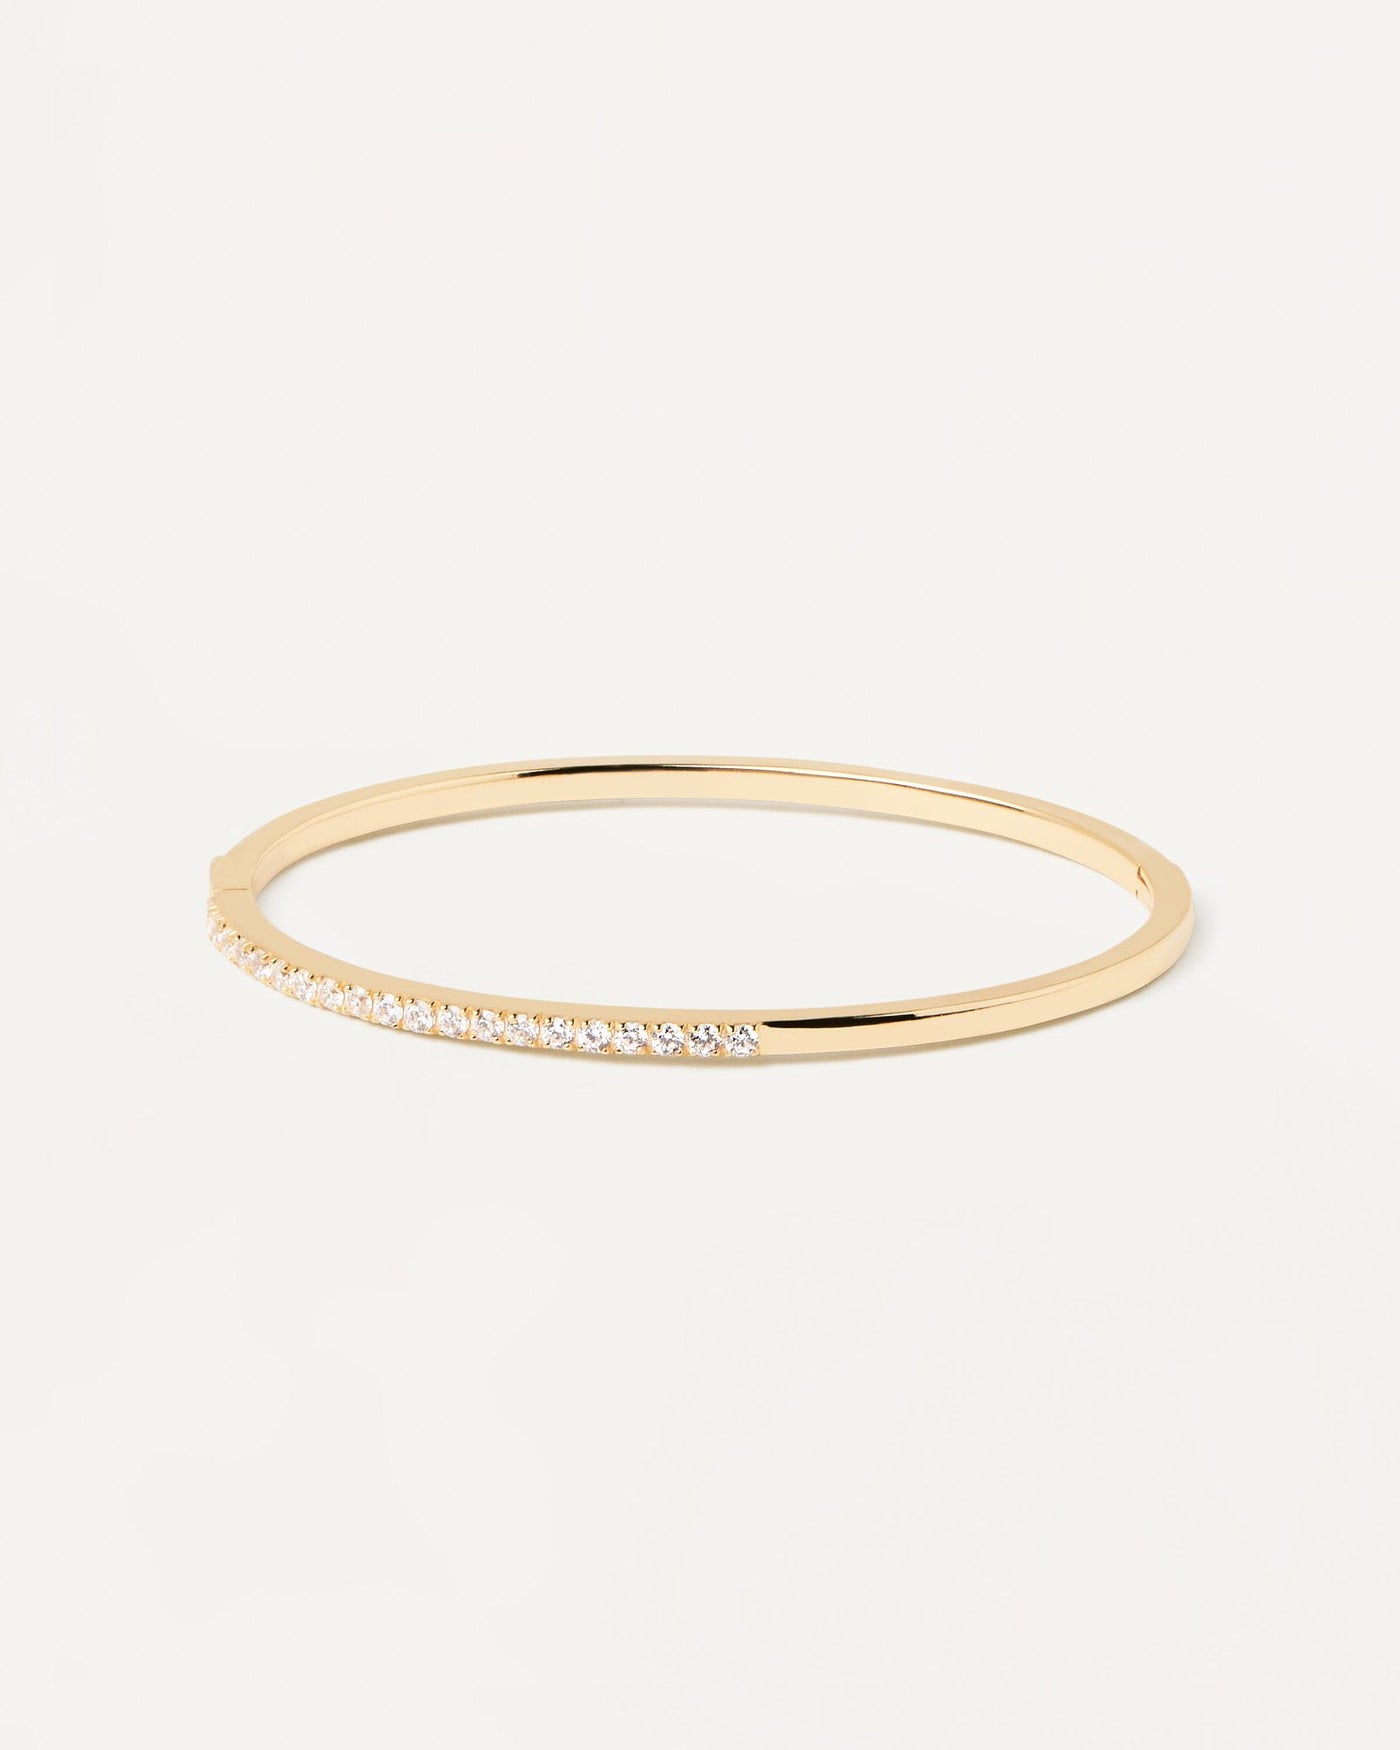 2024 Selection | April Bangle. Gold-plated silver hinged rigid bracelet with 2 bands of white zirconia. Get the latest arrival from PDPAOLA. Place your order safely and get this Best Seller. Free Shipping.